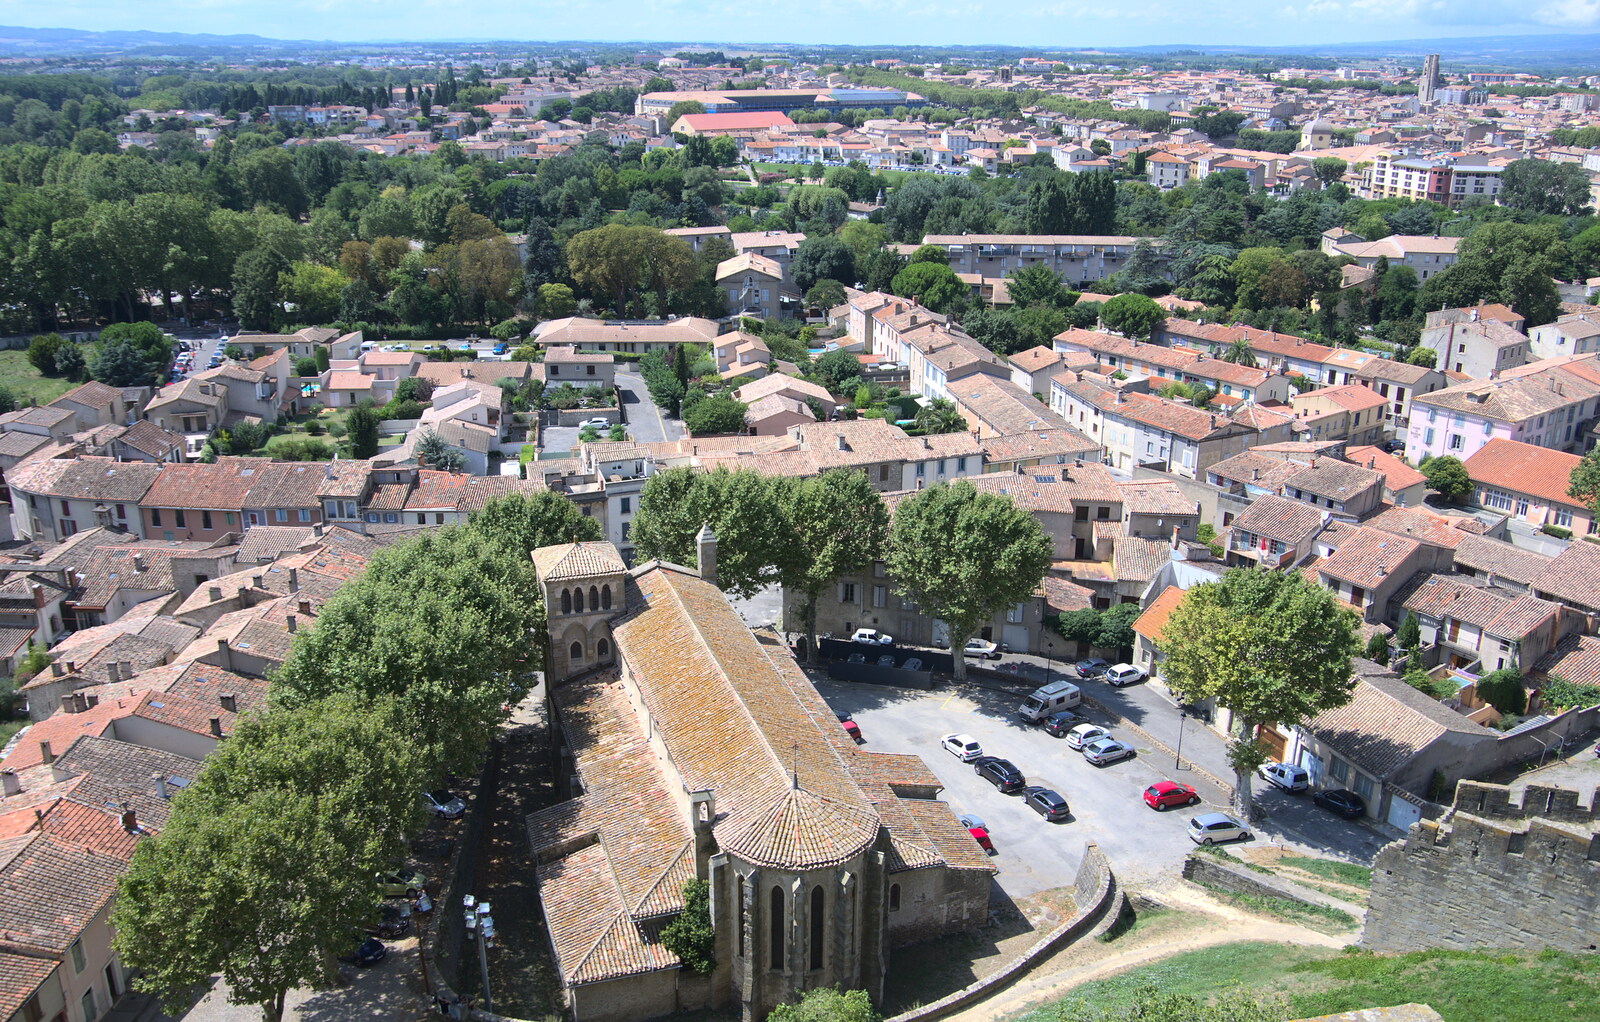 A view over the city from The Château Comtal, Lastours and the Journey Home, Carcassonne, Aude, France - 14th August 2018